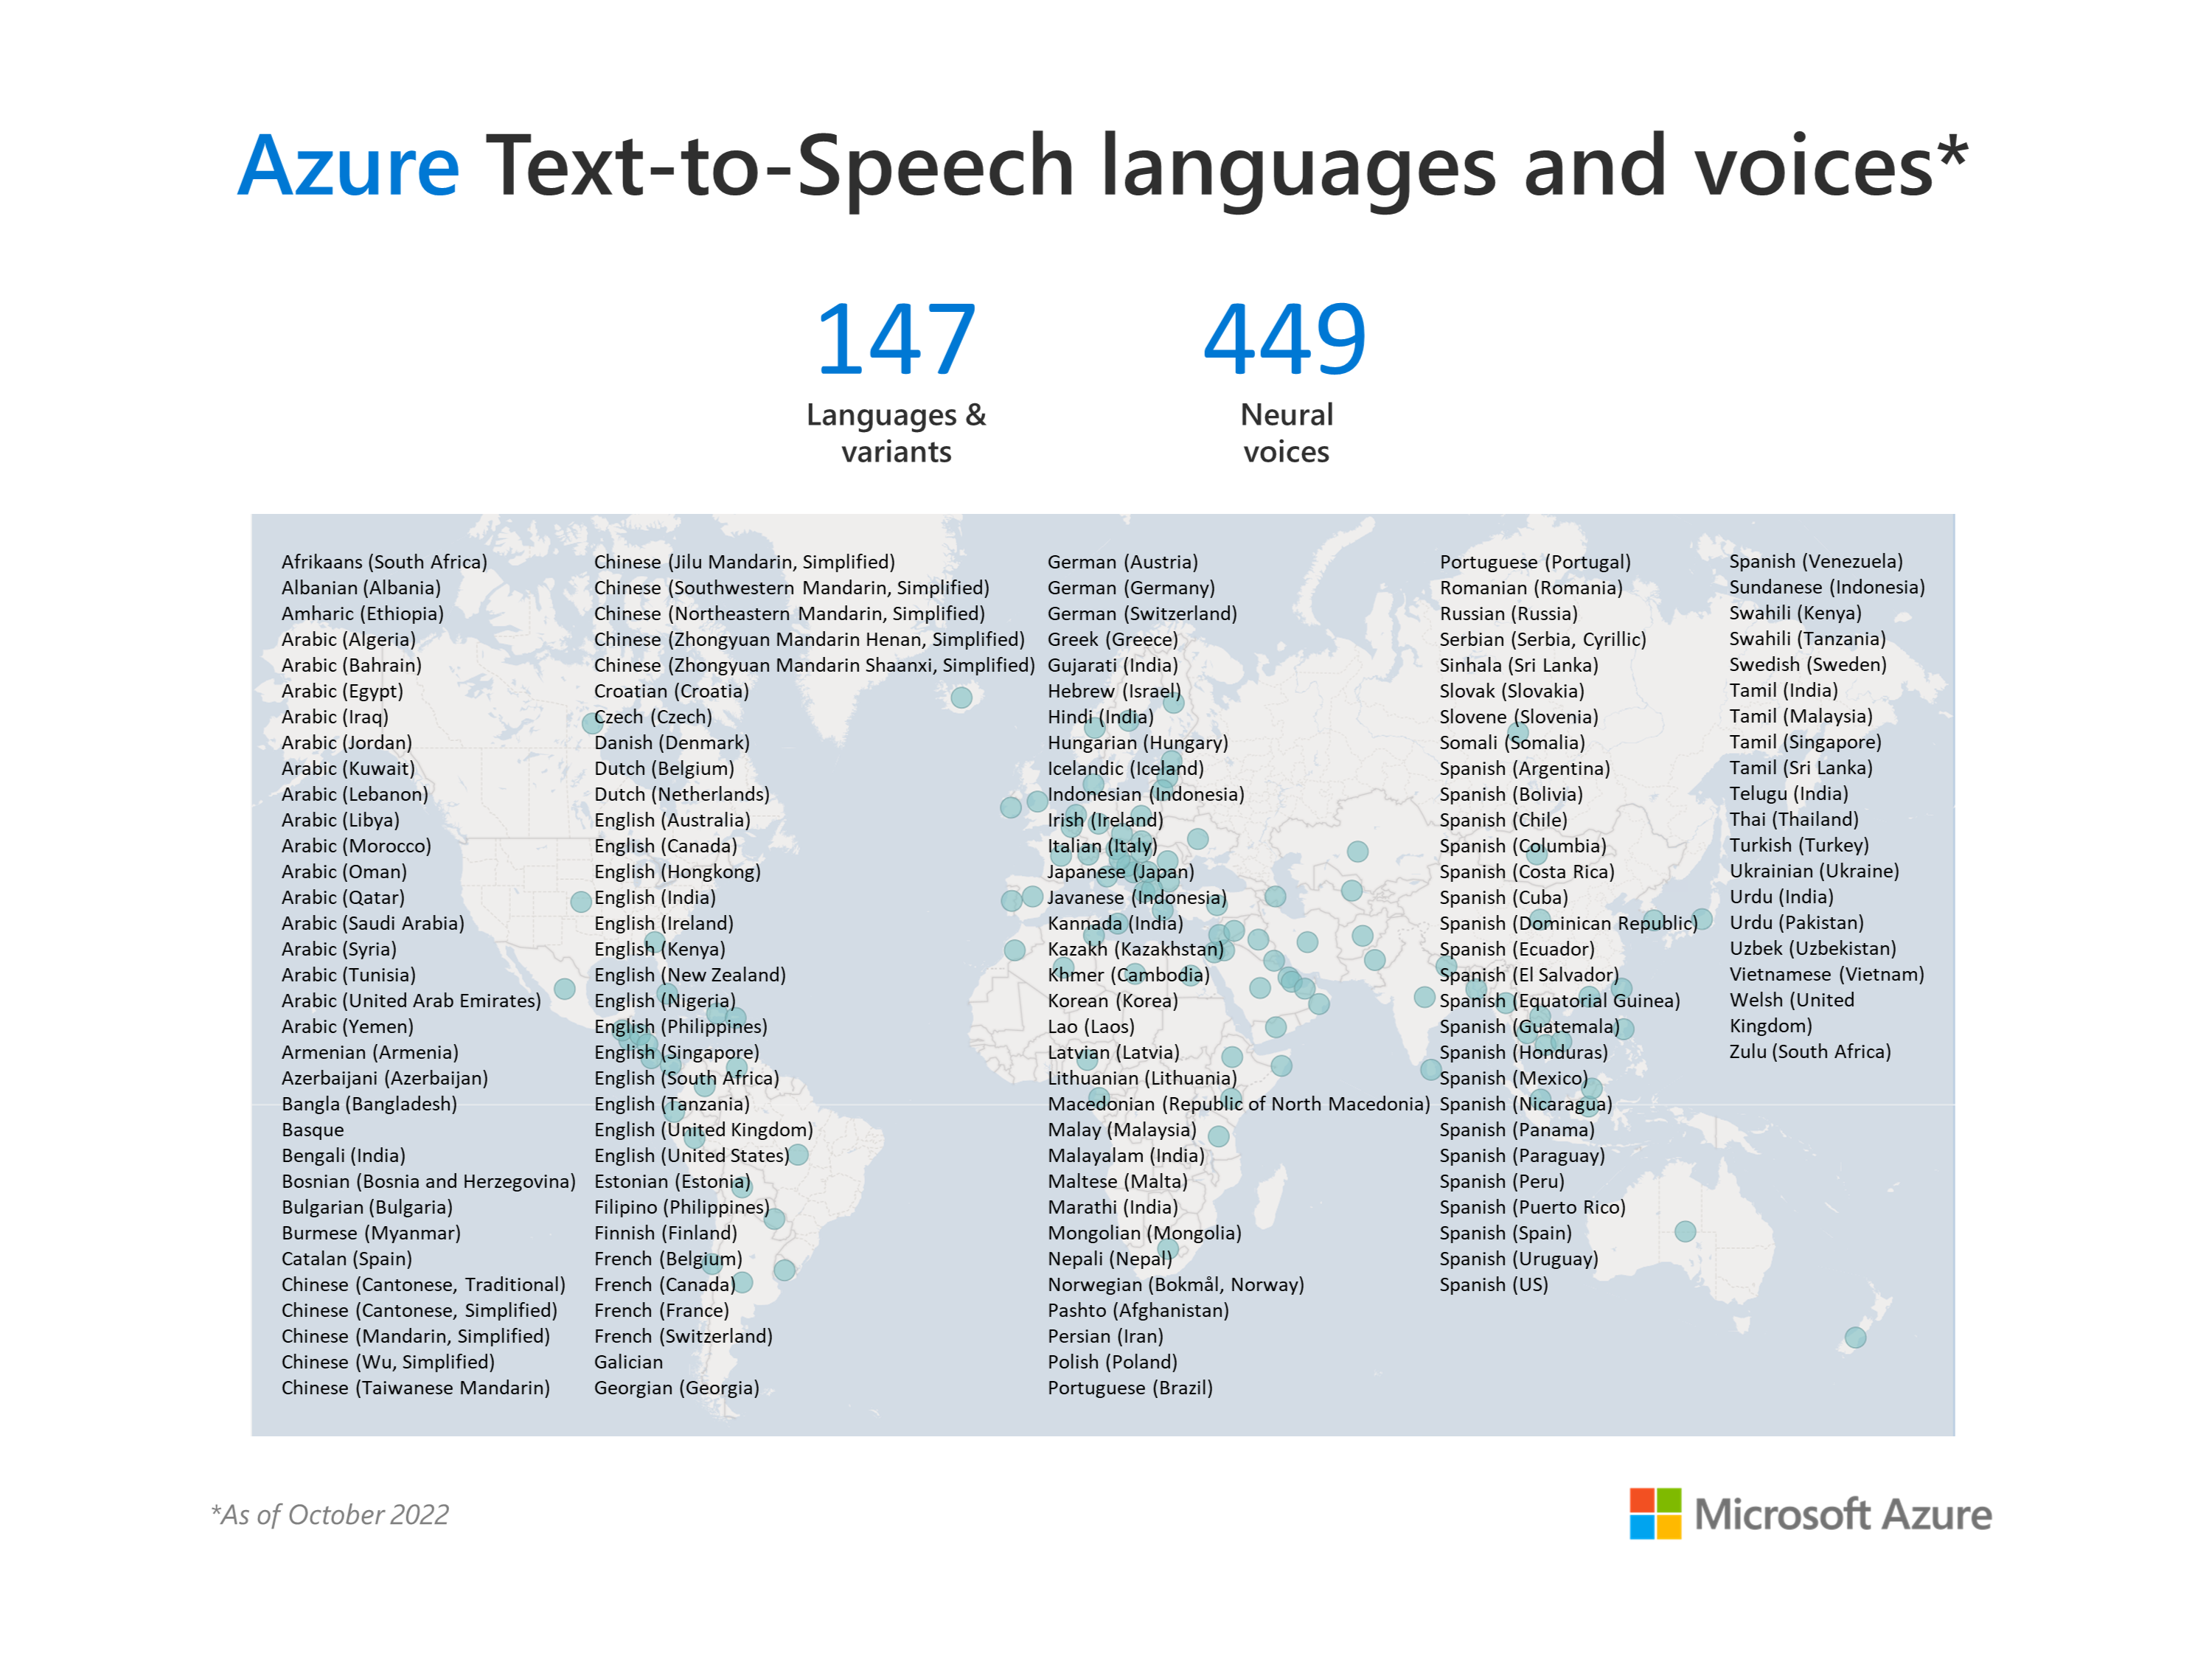 Azure Cognitive Services releases new languages and voices for Neural  Text-to-Speech